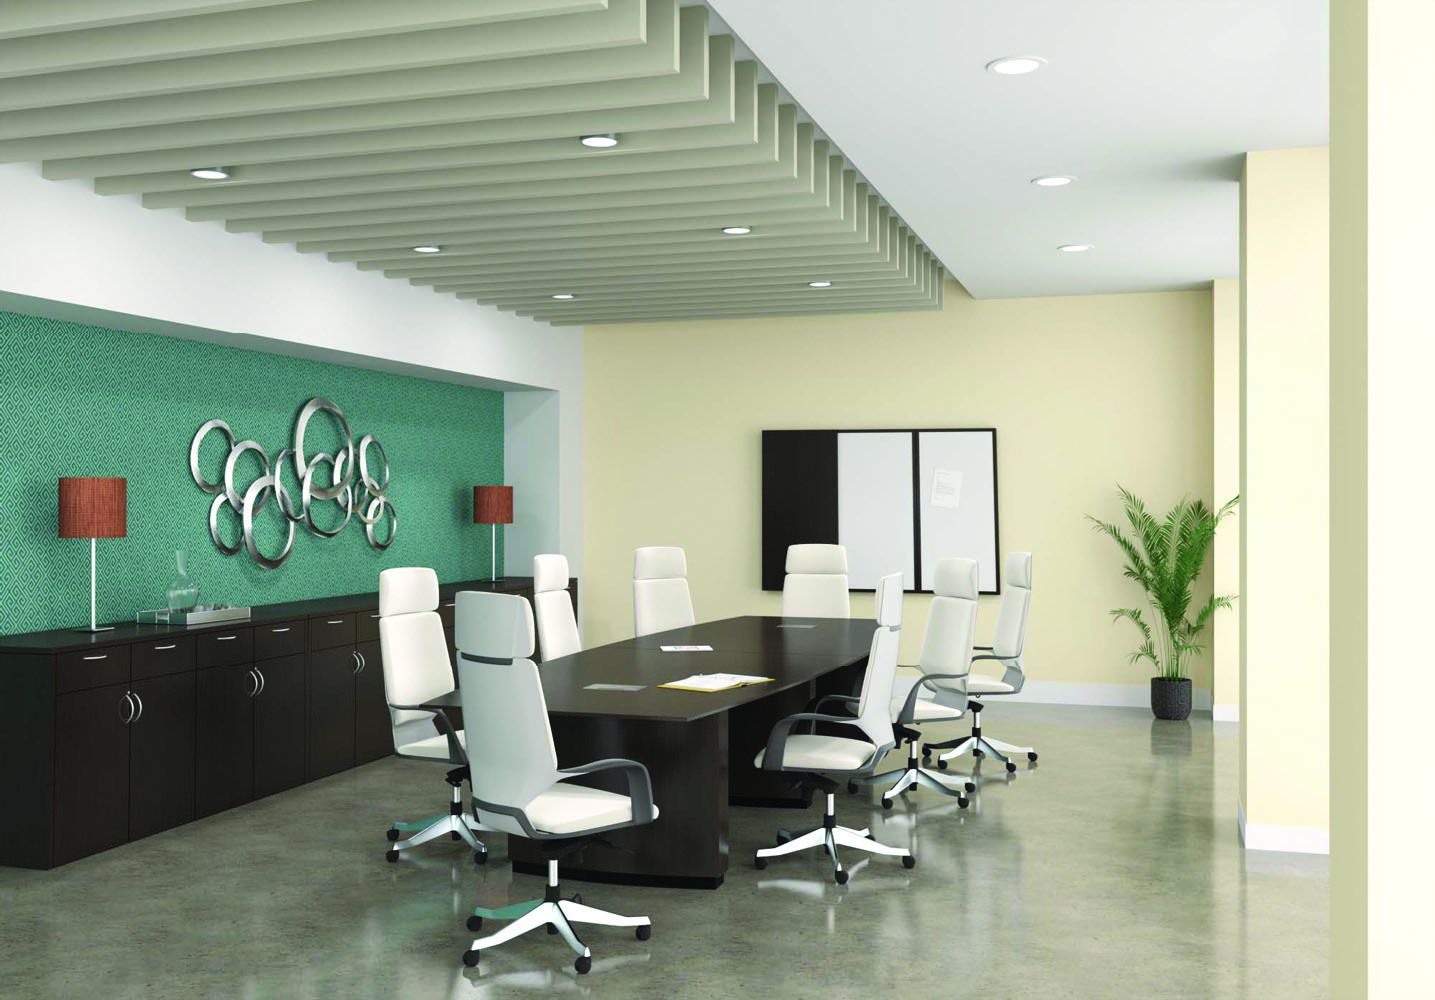 Conference Table And Chairs - Collaboration Spaces Office Furniture Sets